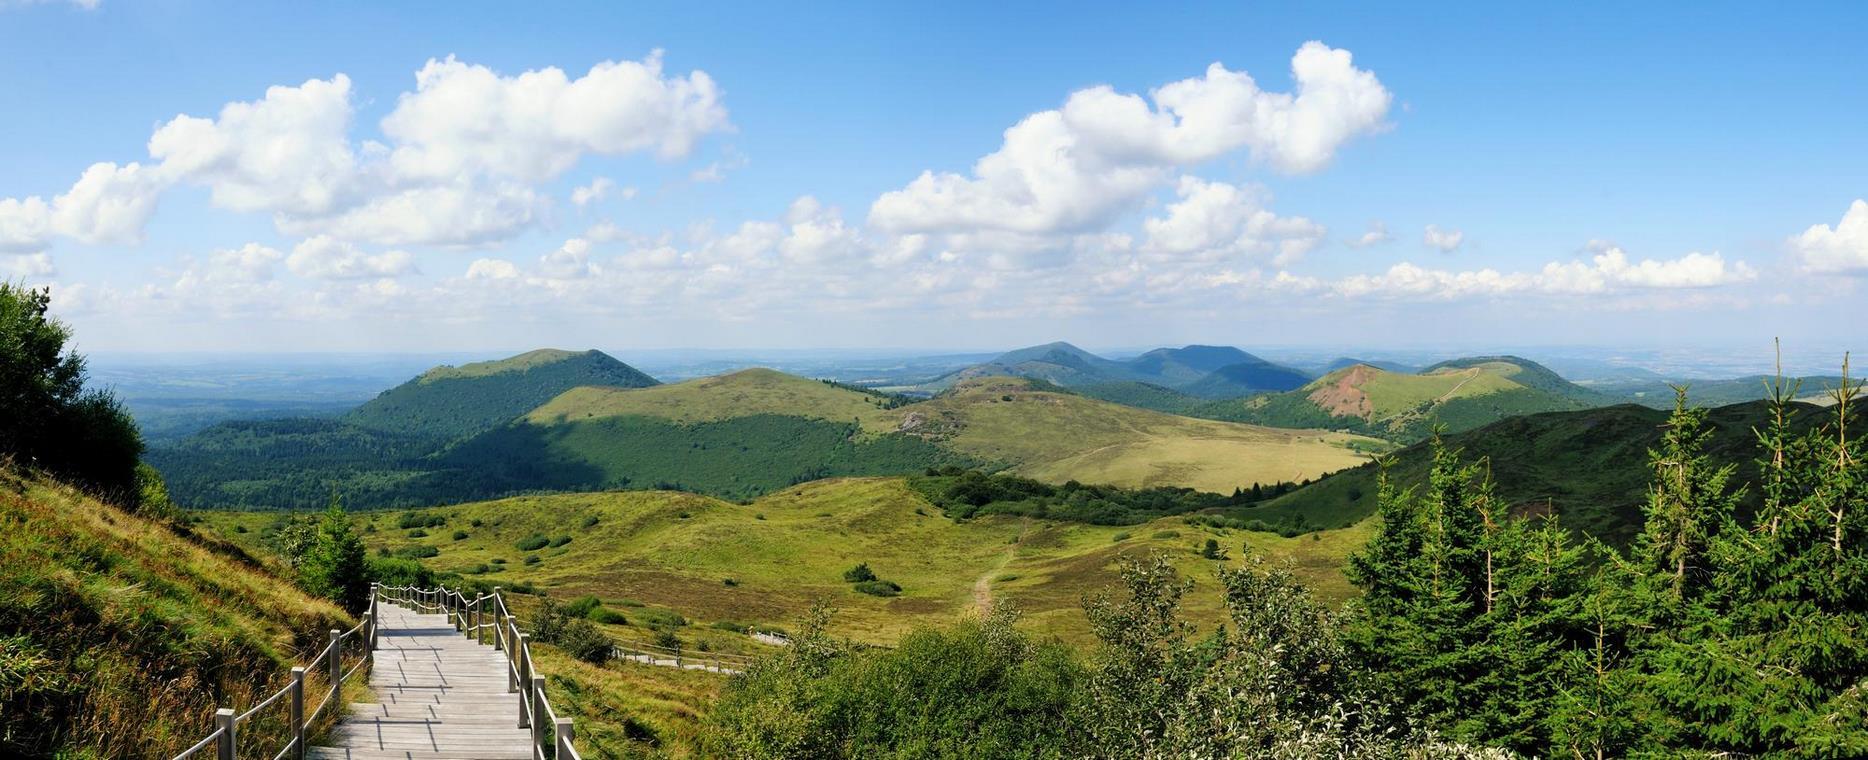 Panoramic view of the Puy de Dome - Auvergne